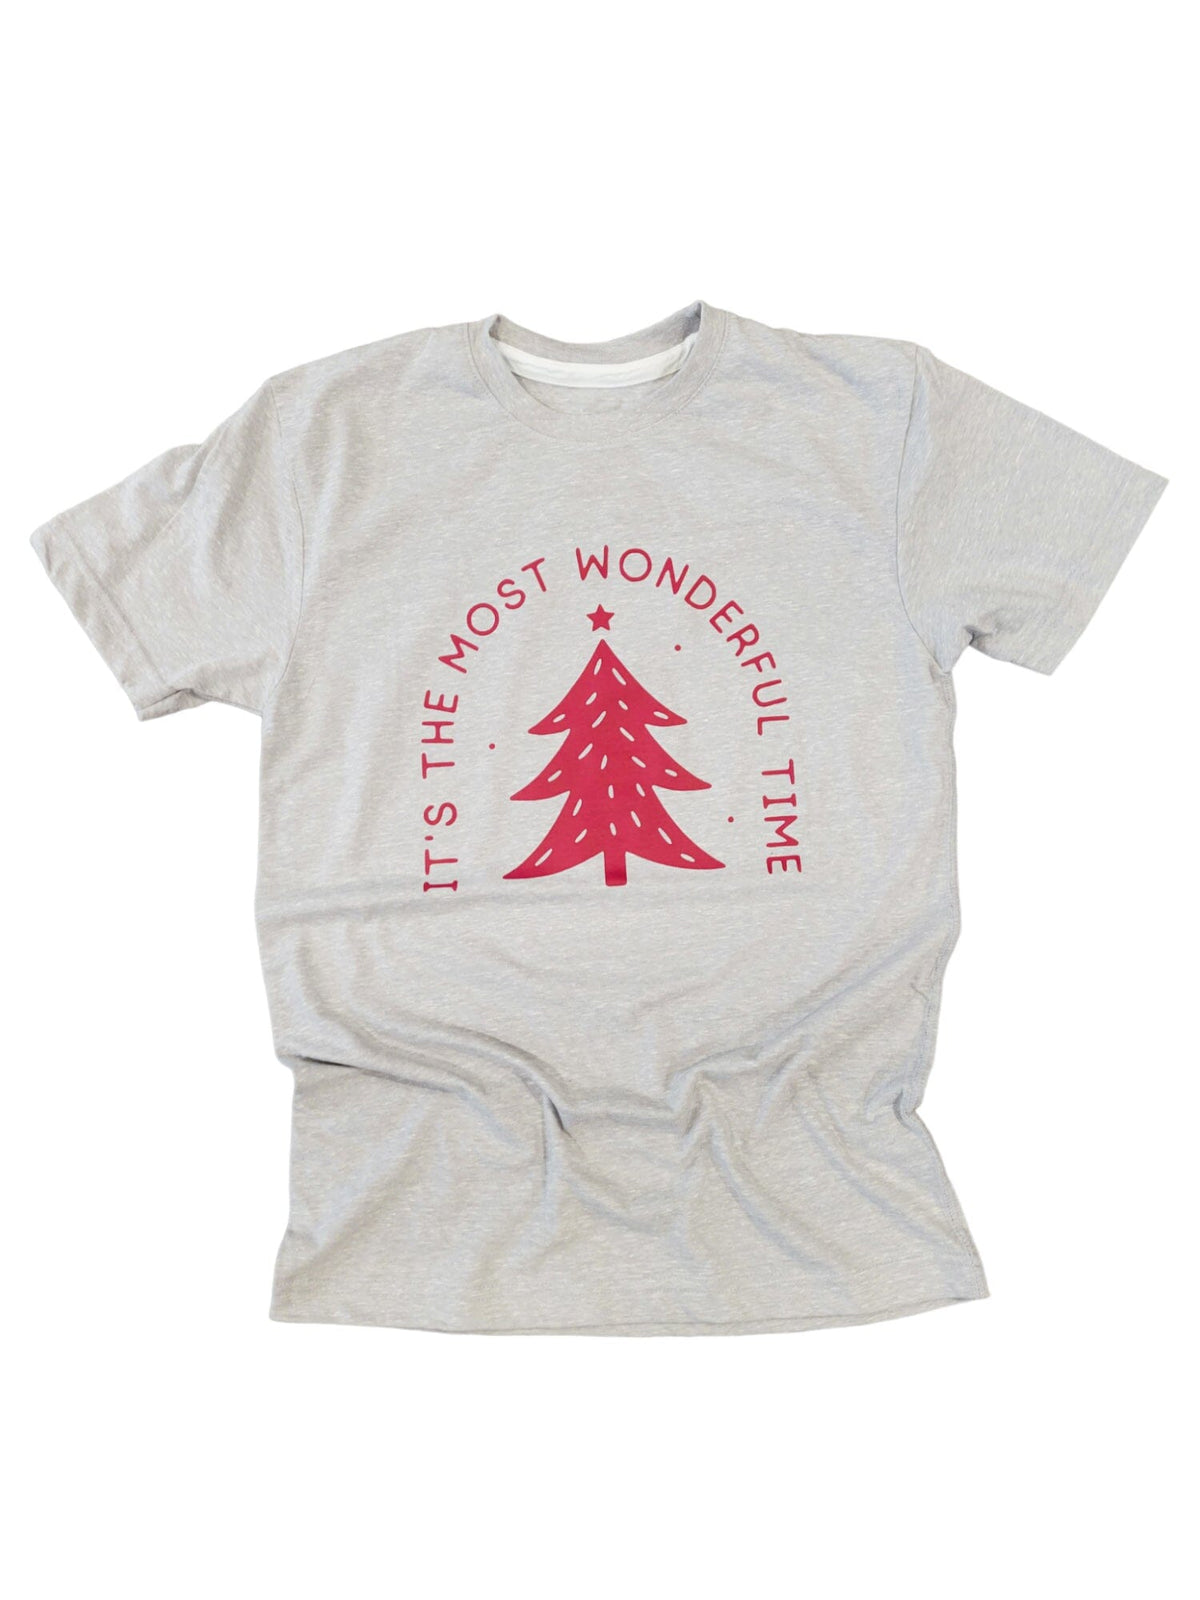 It's The Most Wonderful Time Adult Shirt